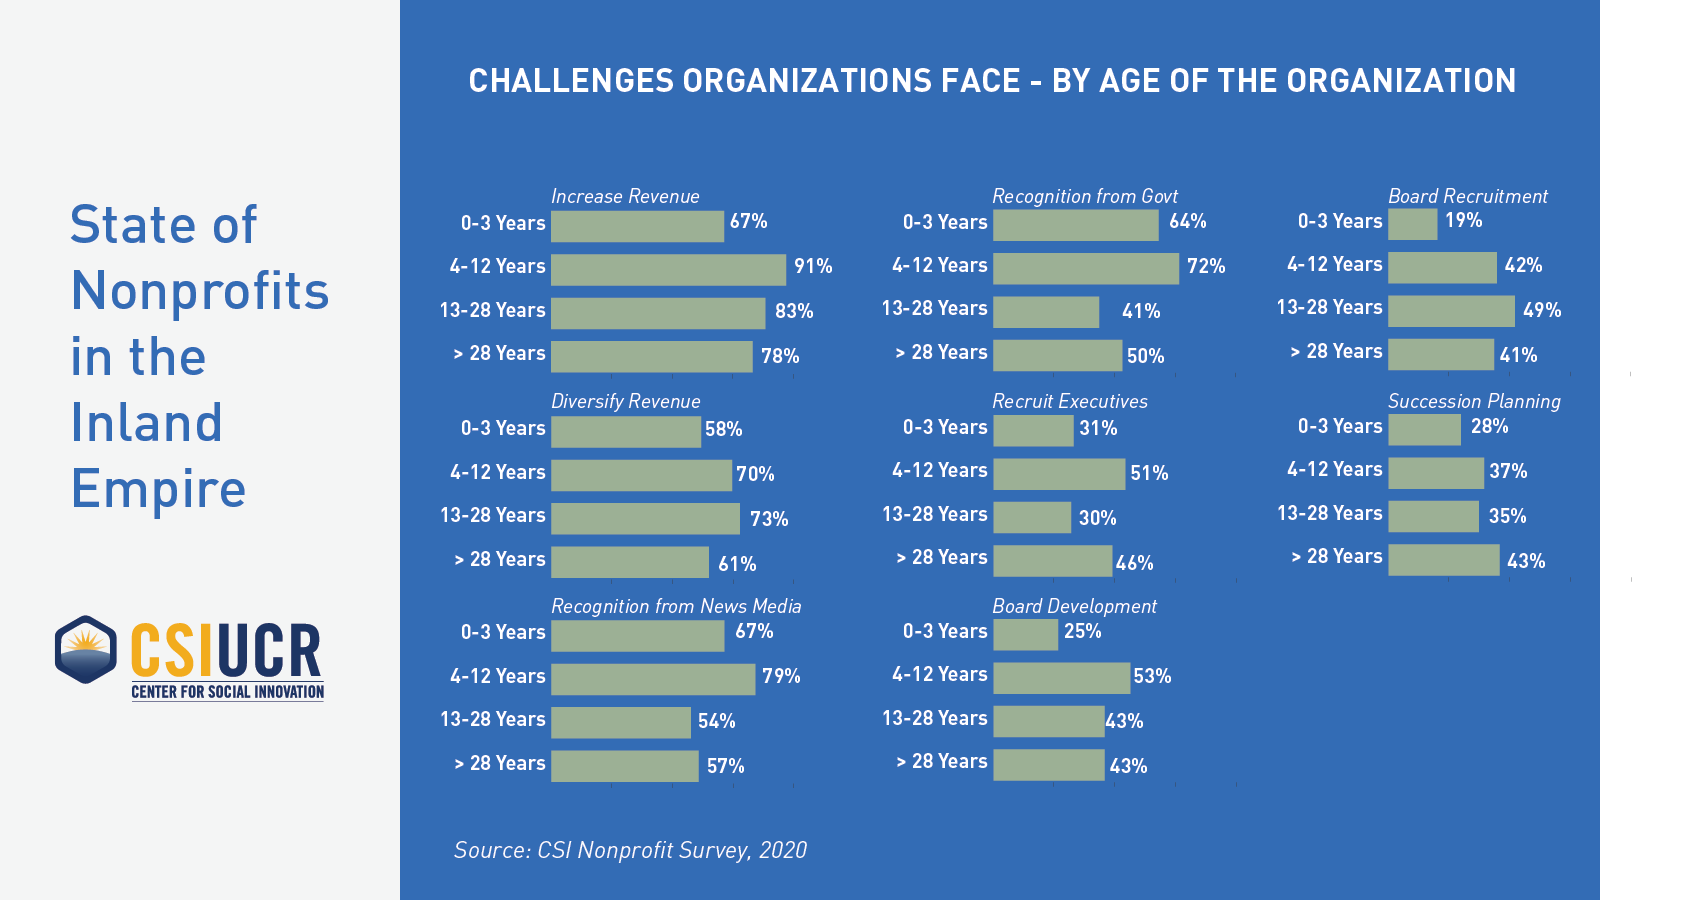 Challenges Organizations Face by Age of the Org